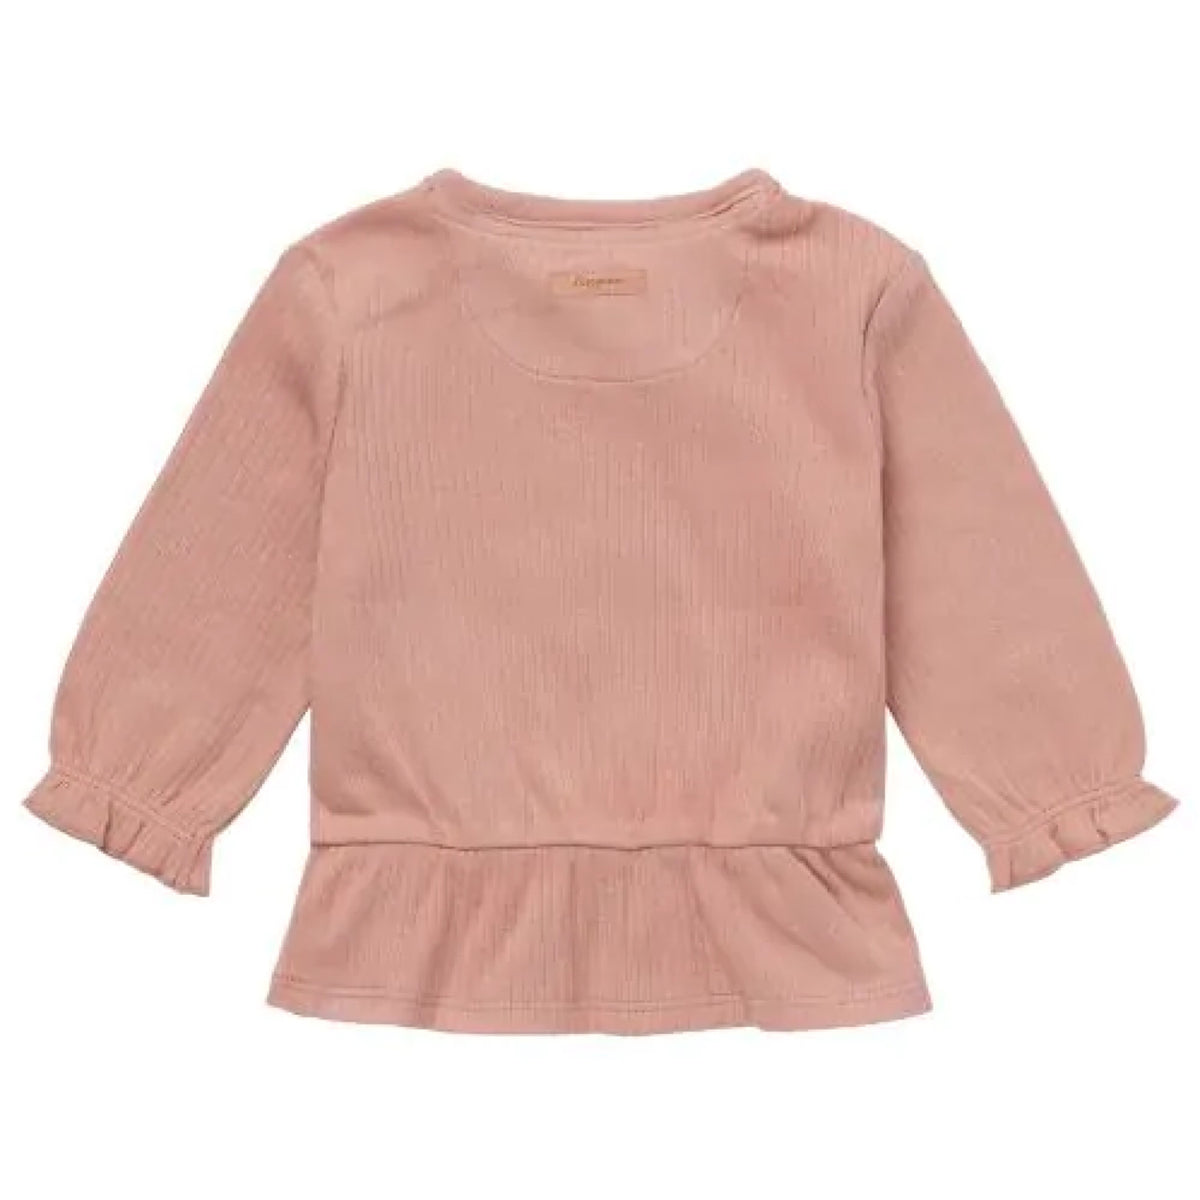 Pink Ruffled Top with Long Sleeves